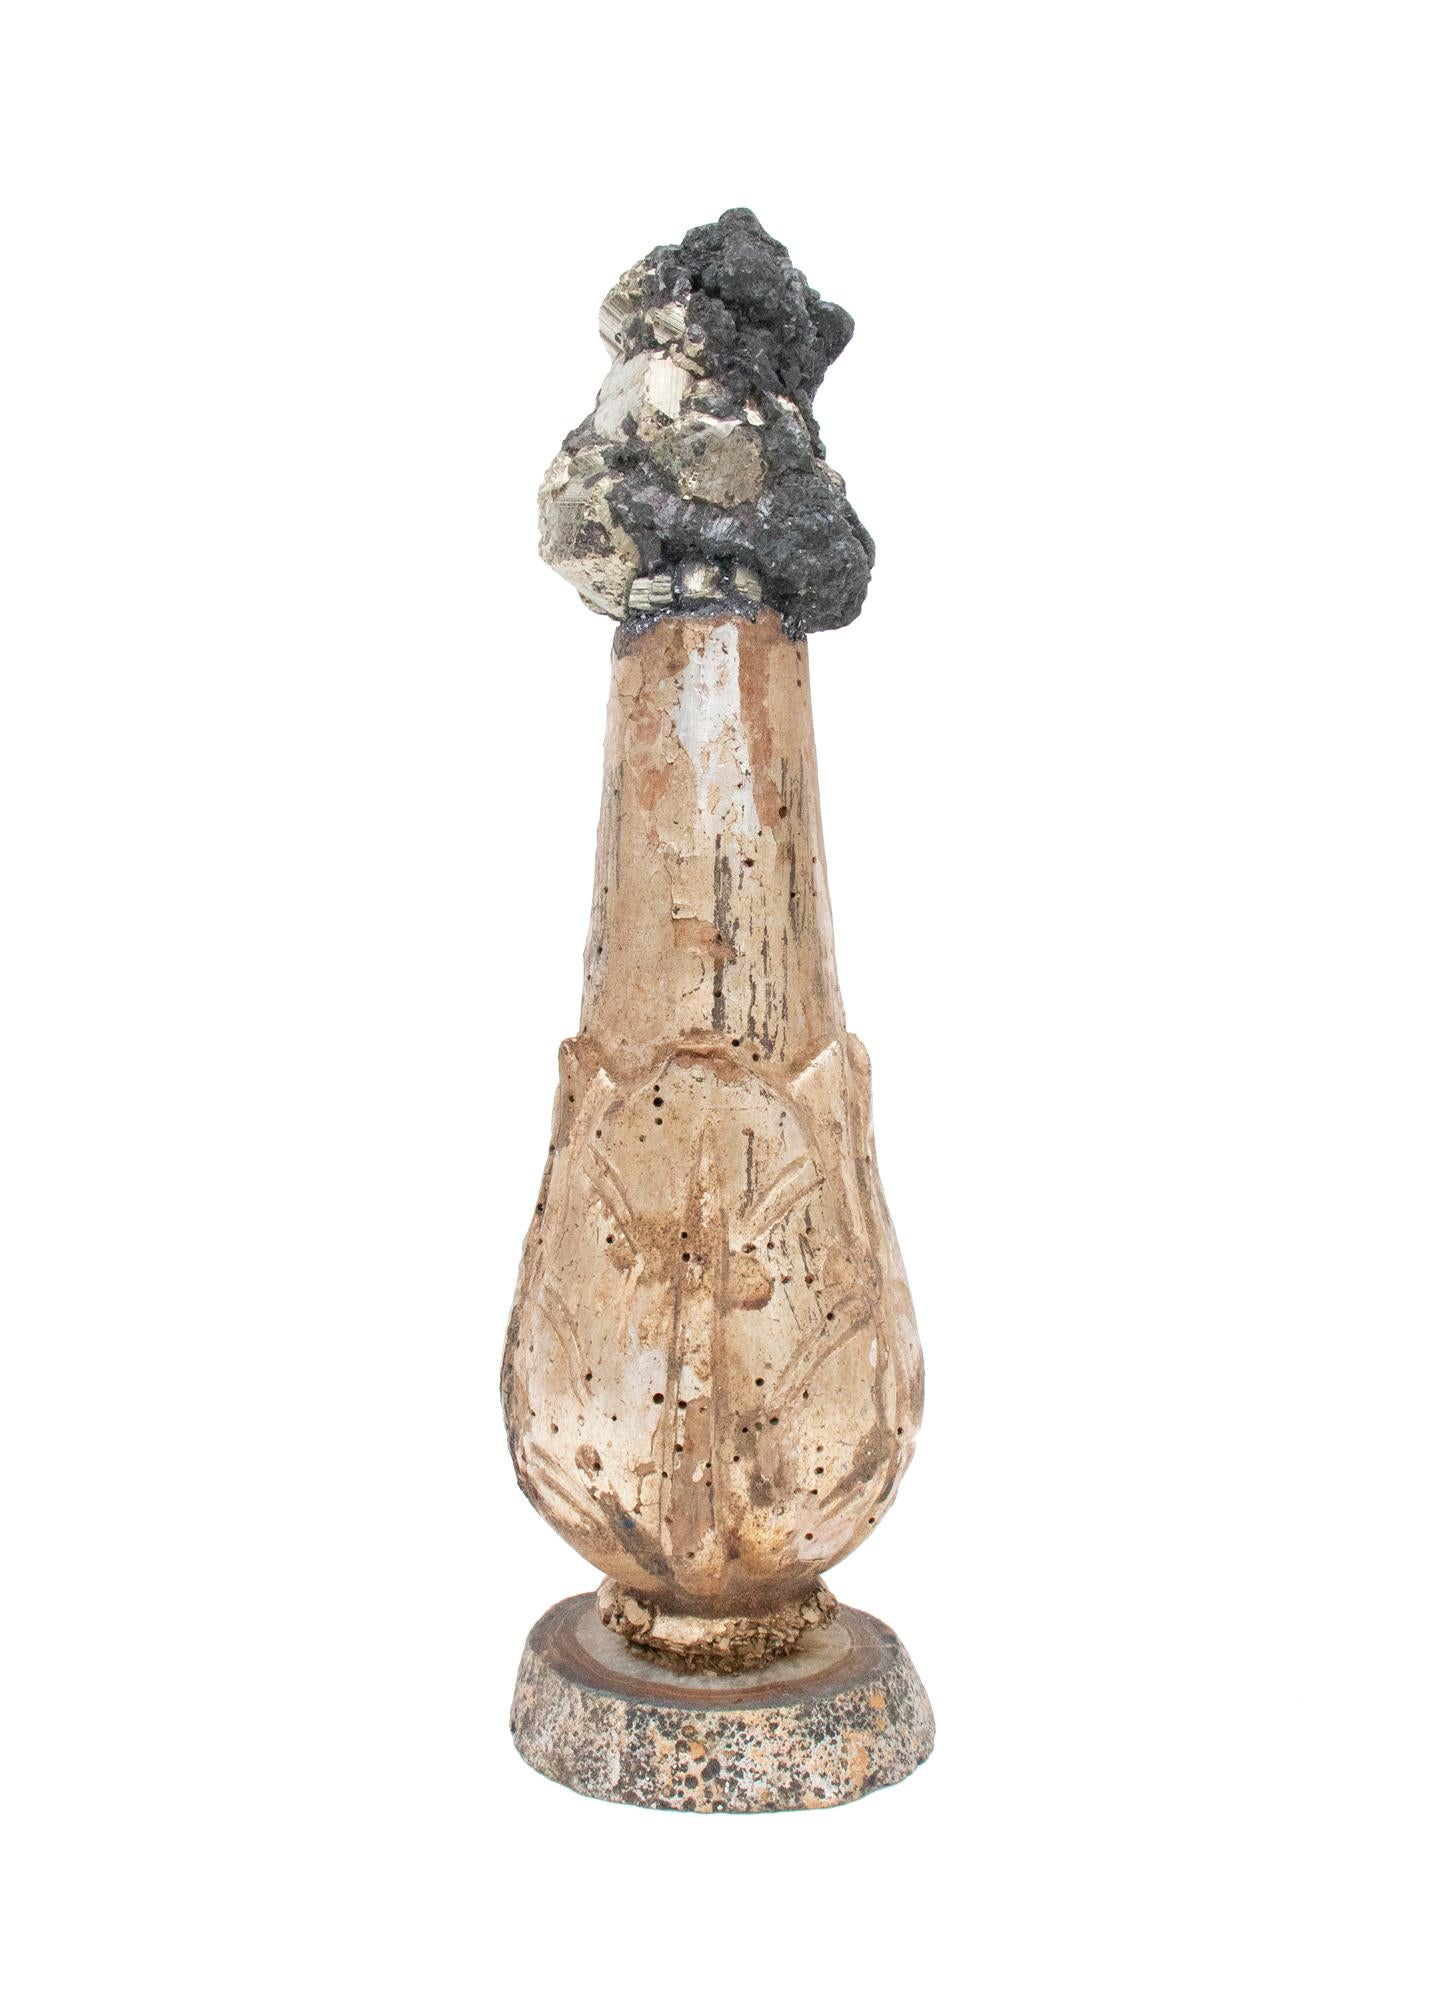 18th-century Italian gilded candlestick fragment with pyrite in matrix on a polished agate base.

The fragment was originally part of a candlestick in a historical Italian church in Italy. It is gilded and mounted with coordinating pyrite in matrix